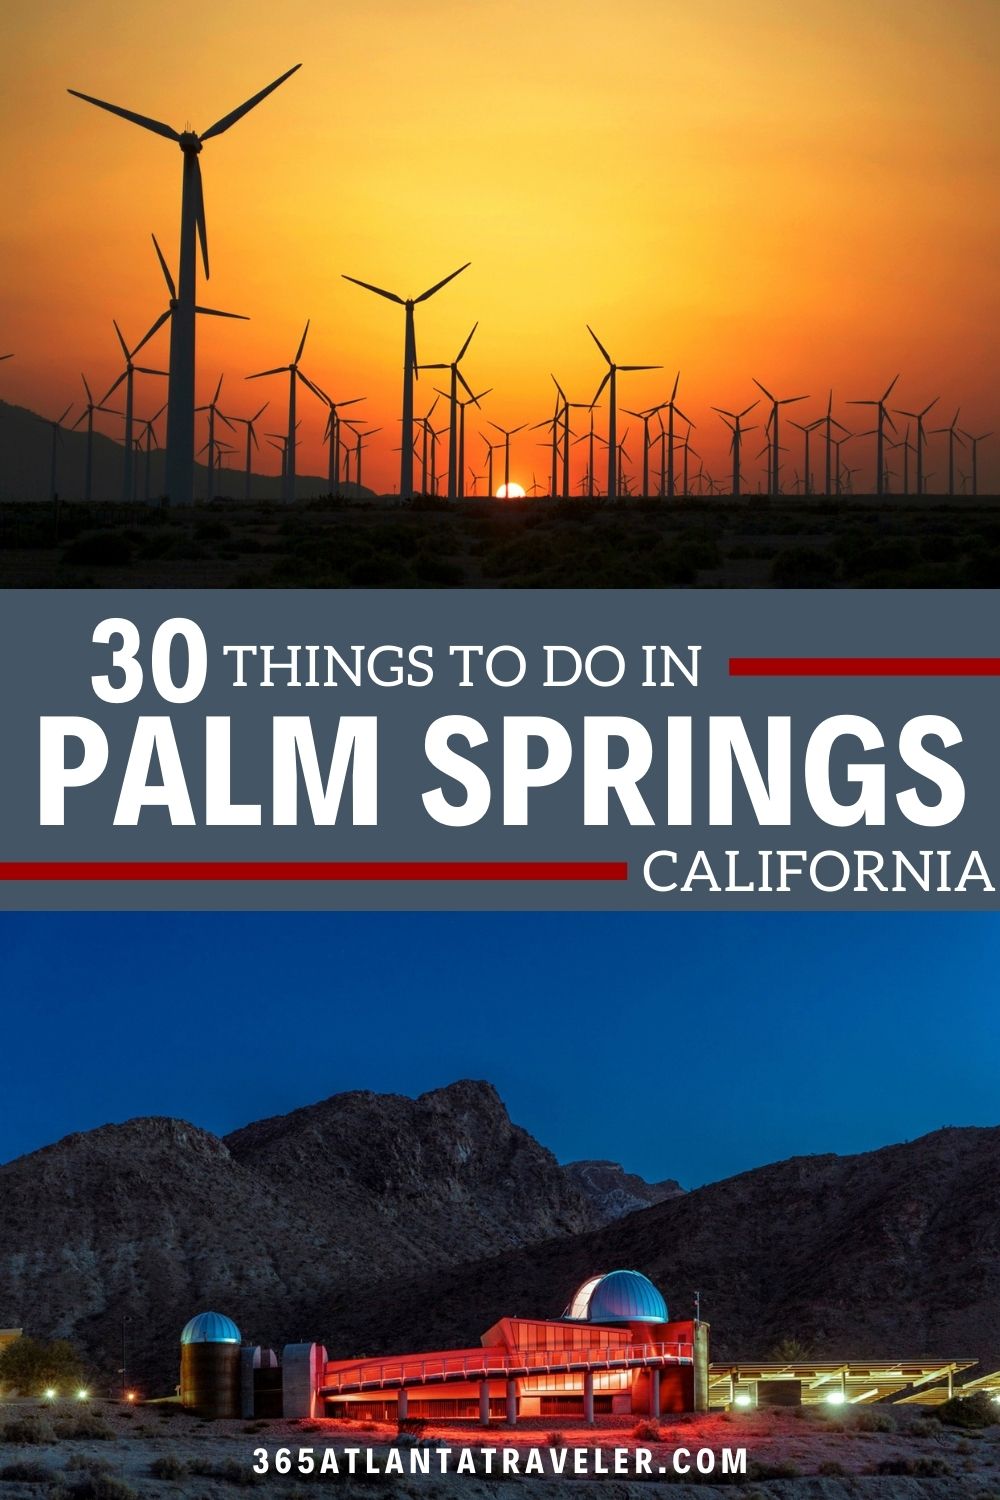 30 BEST THINGS TO DO IN PALM SPRINGS, CALIFORNIA